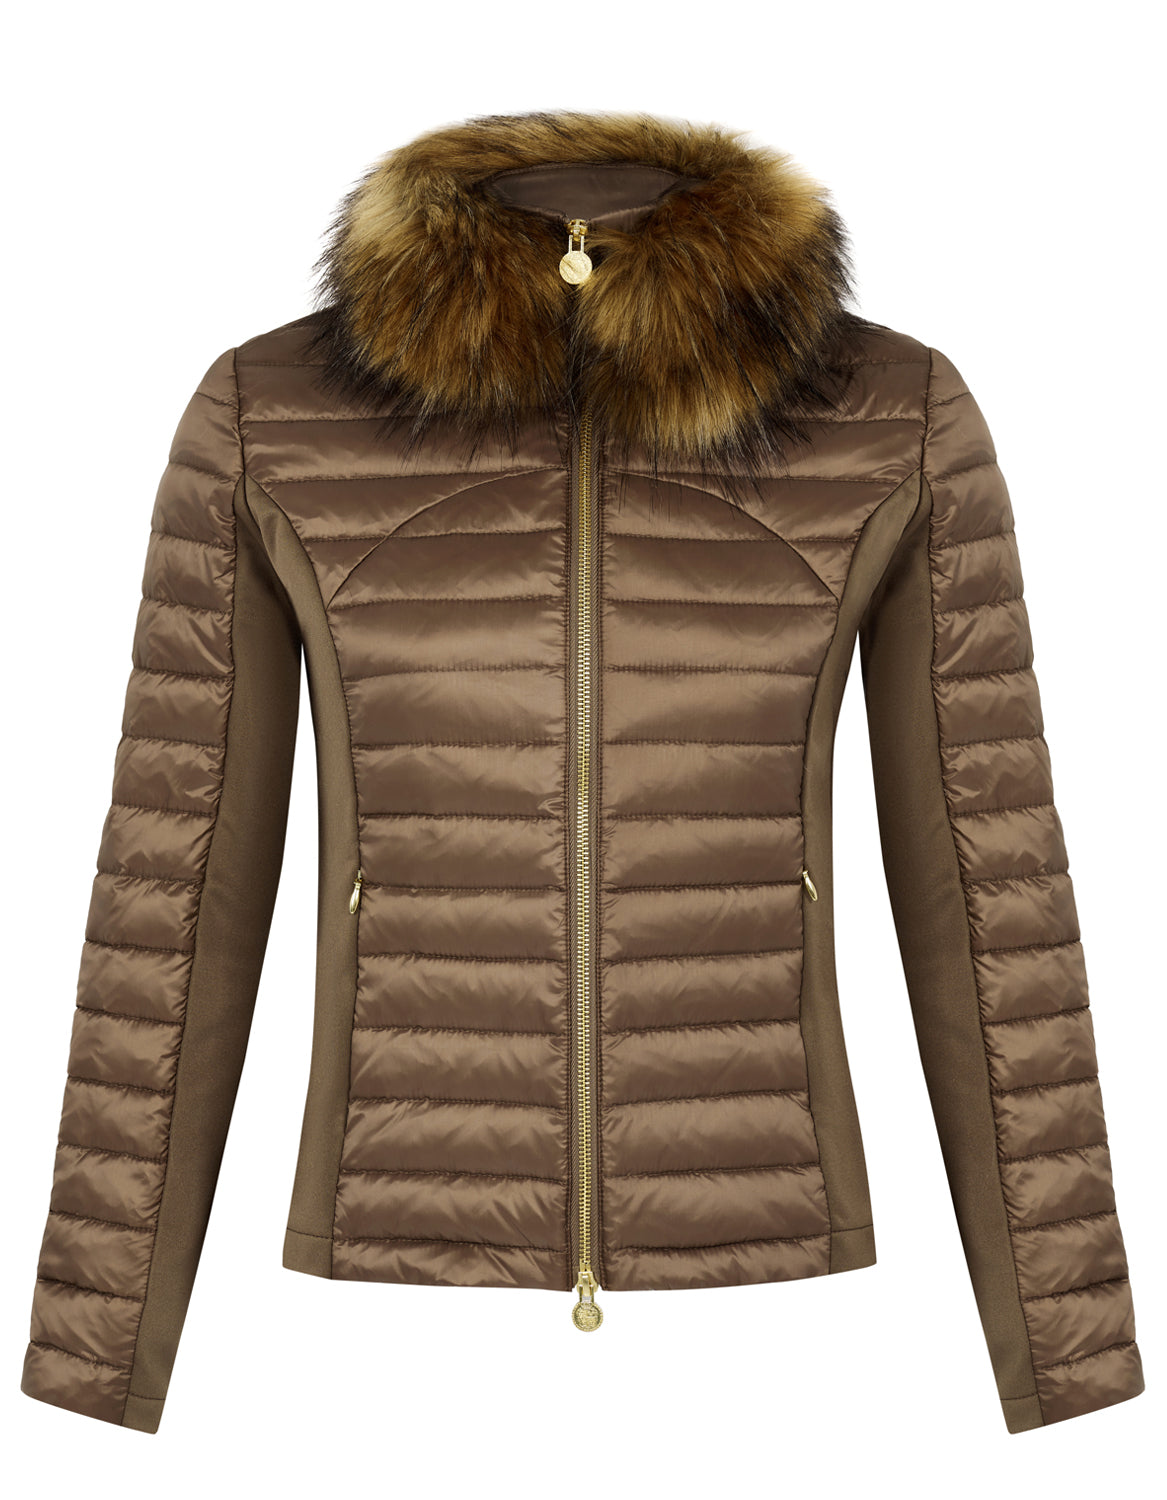 Women's puffer jacket in bronze, khaki colour. The jacket has stretch sides and a detachable faux fur collar.